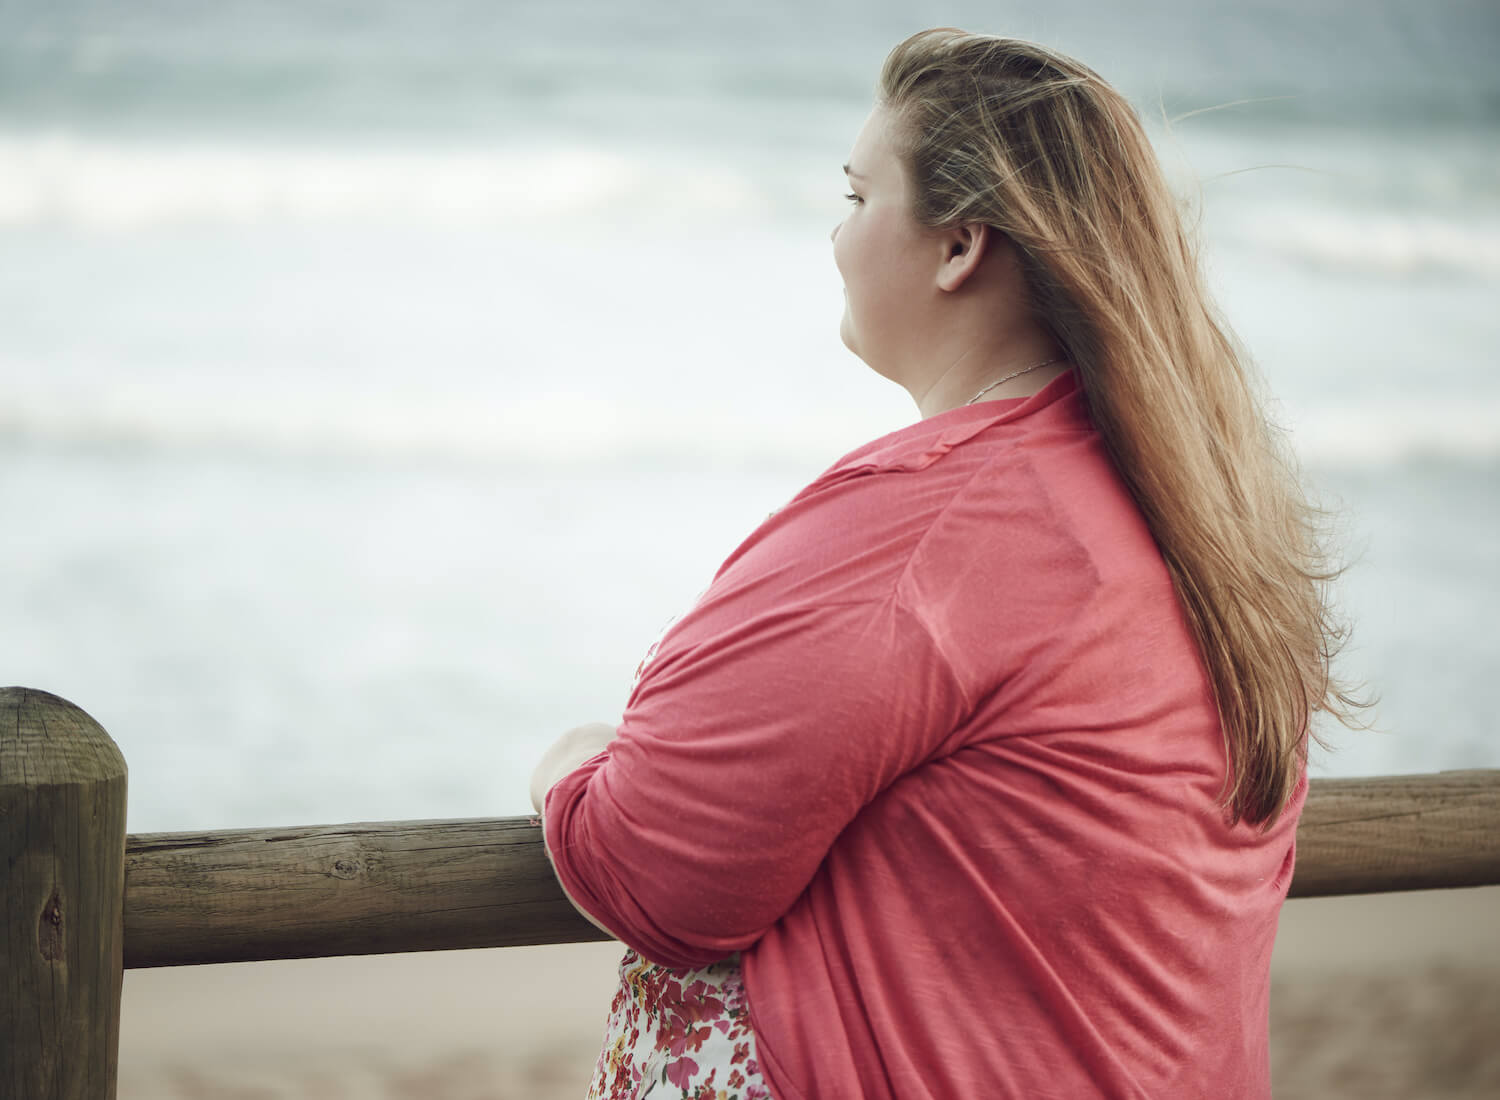 Can You Stretch Your Stomach After Gastric Sleeve Surgery?